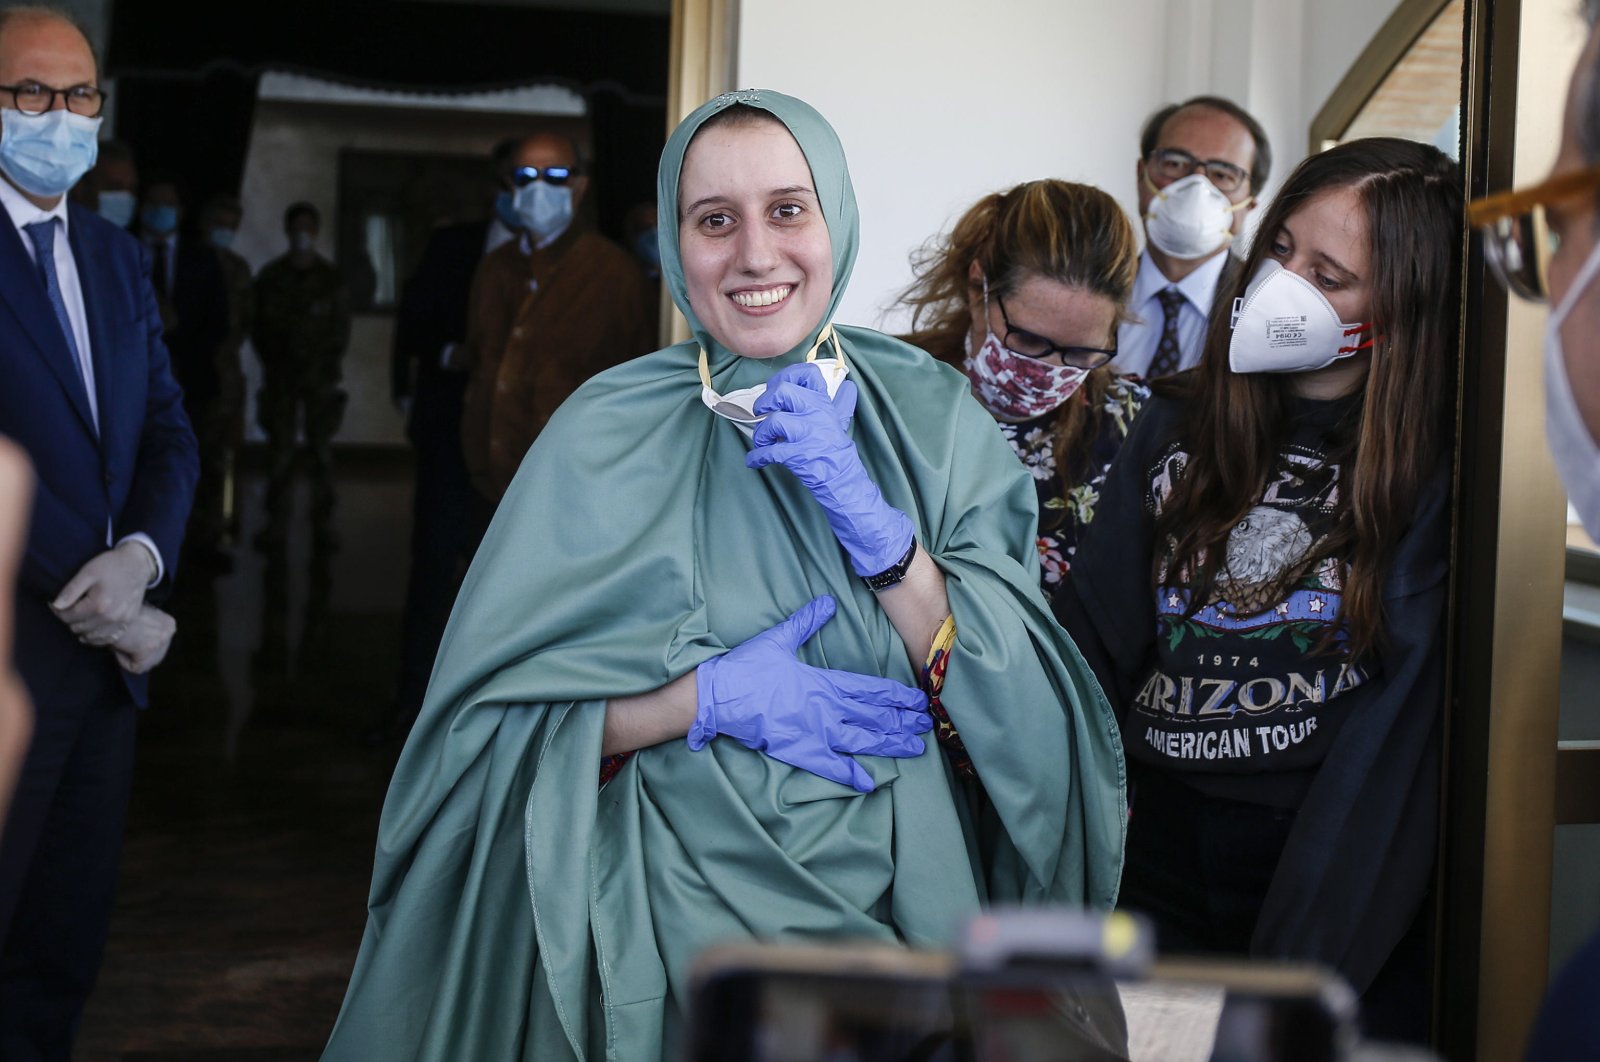 Silvia Romano, wearing a green tunic, reacts upon her arrival at the Ciampino airport, Rome, Italy, May 10, 2020. (EPA Photo)